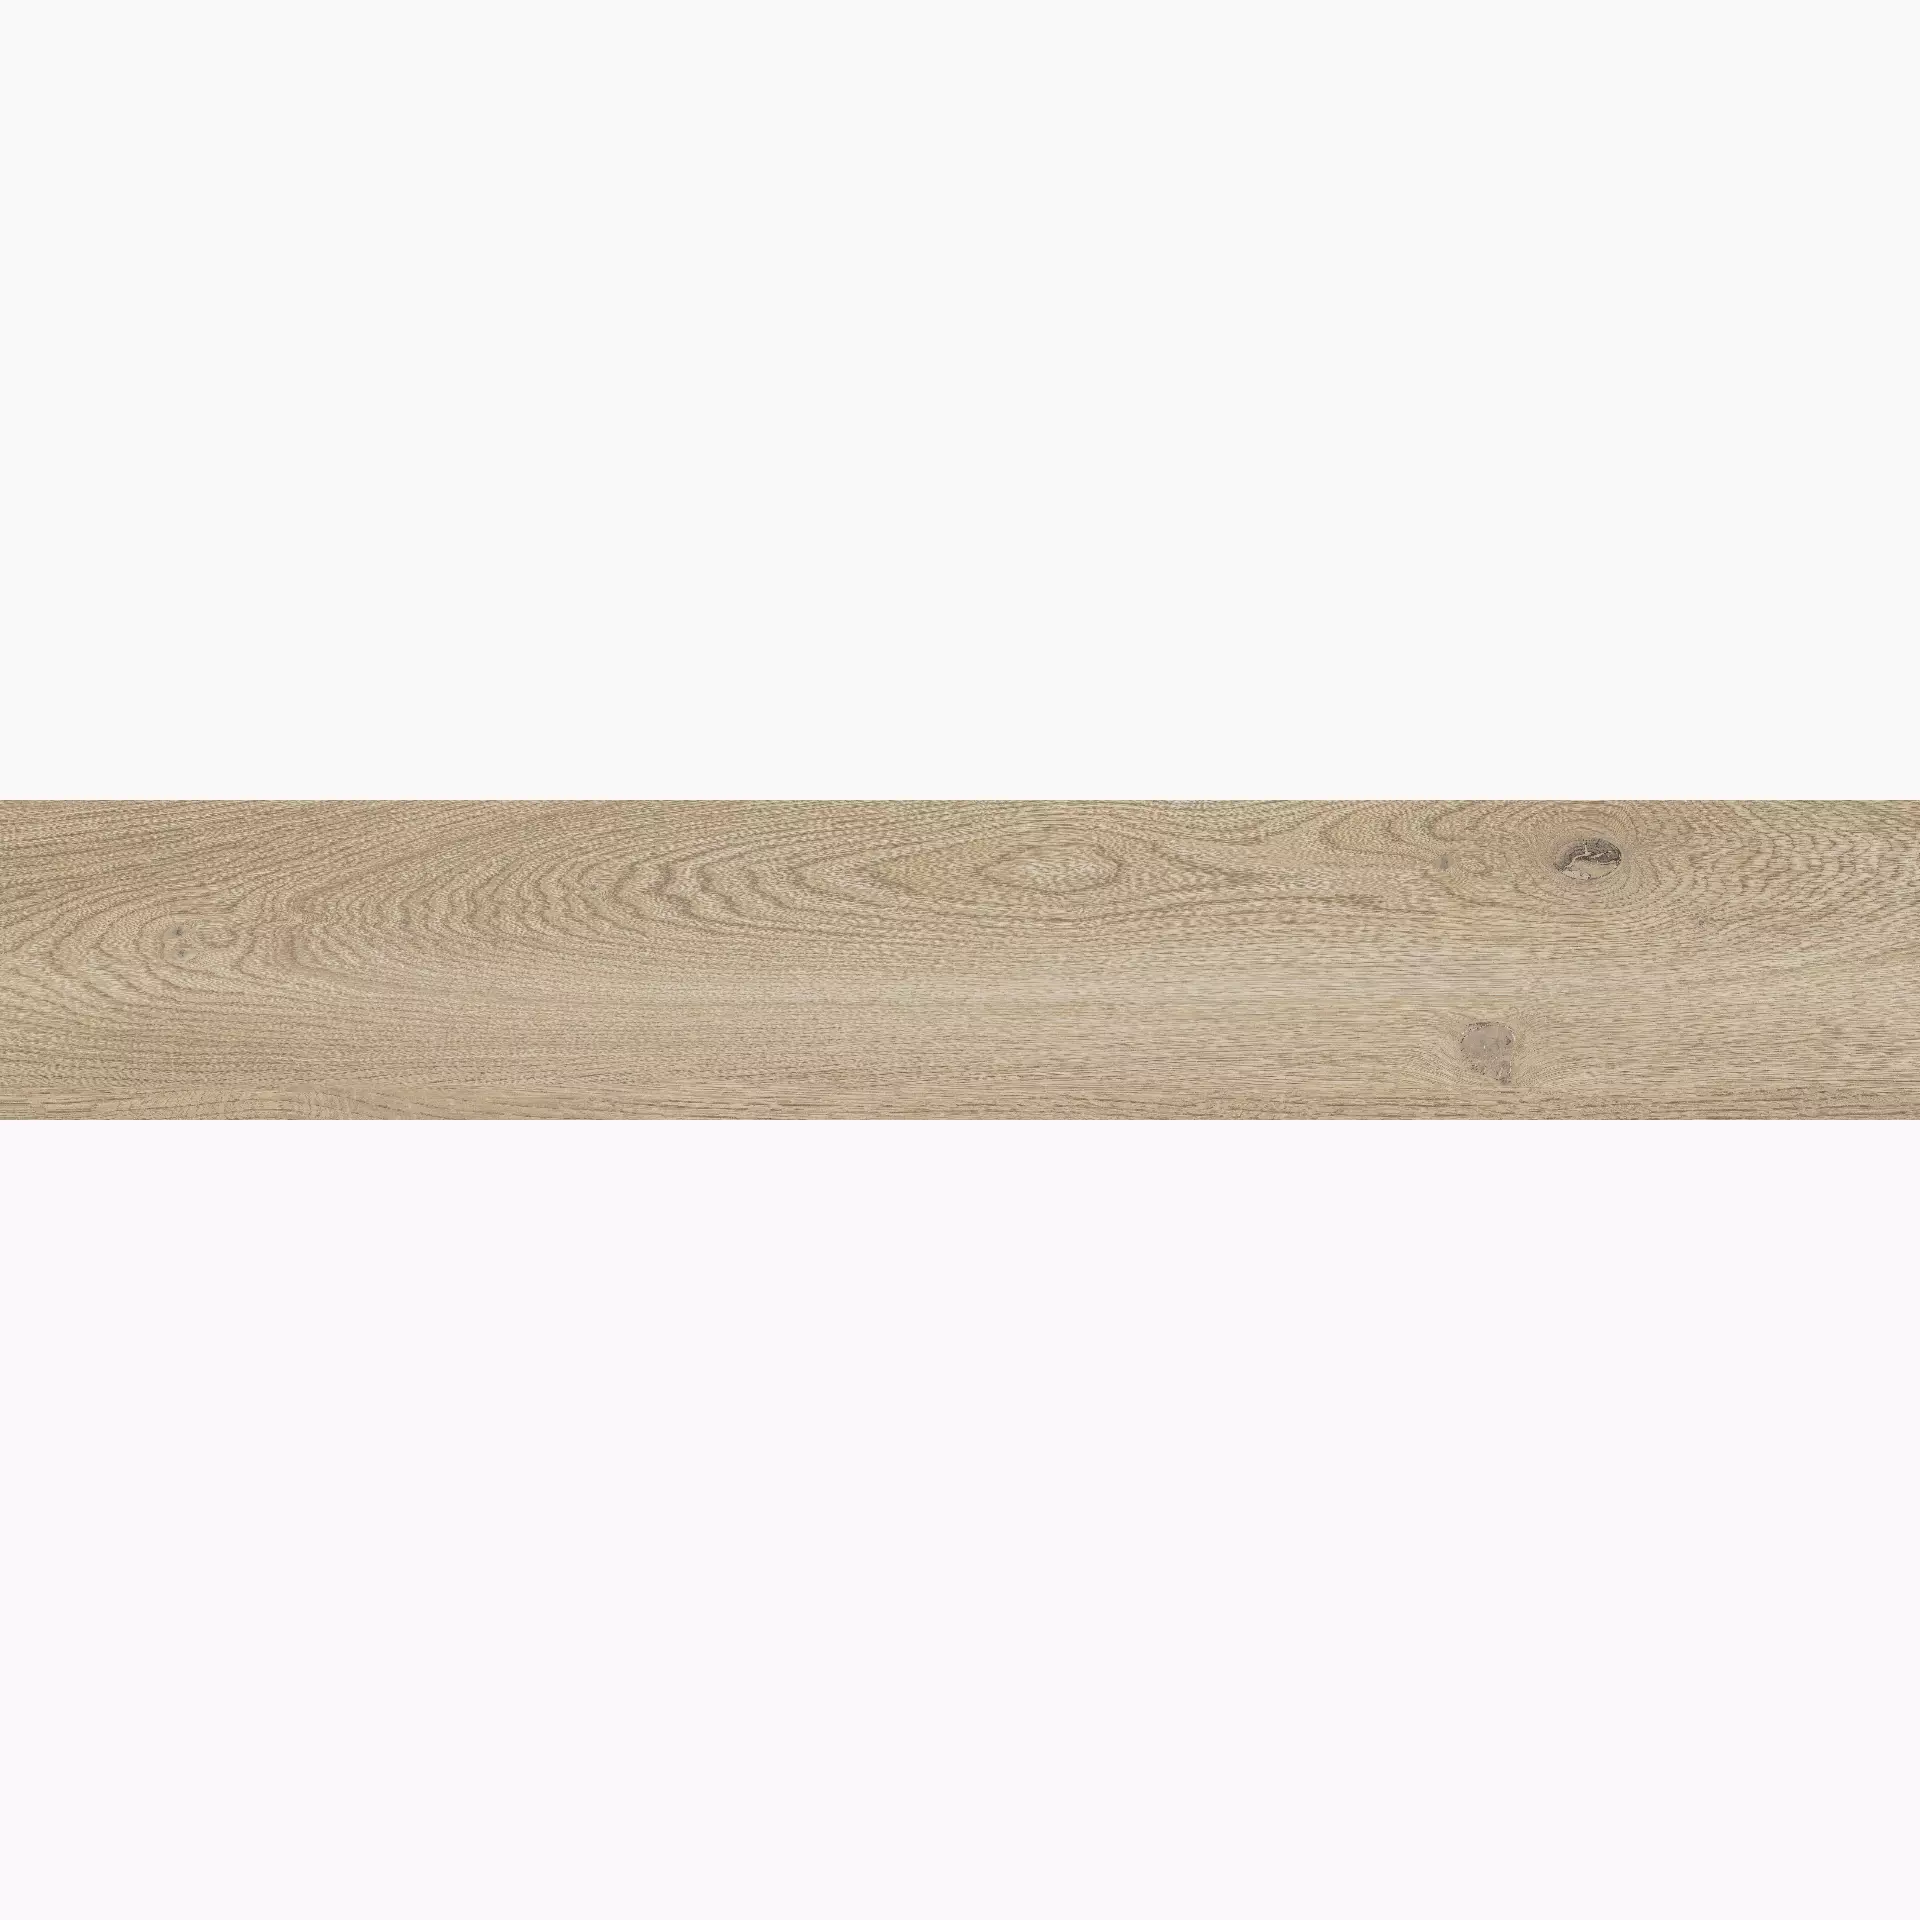 ABK Poetry Wood Gold Naturale PF60010058 20x120cm rectified 8,5mm